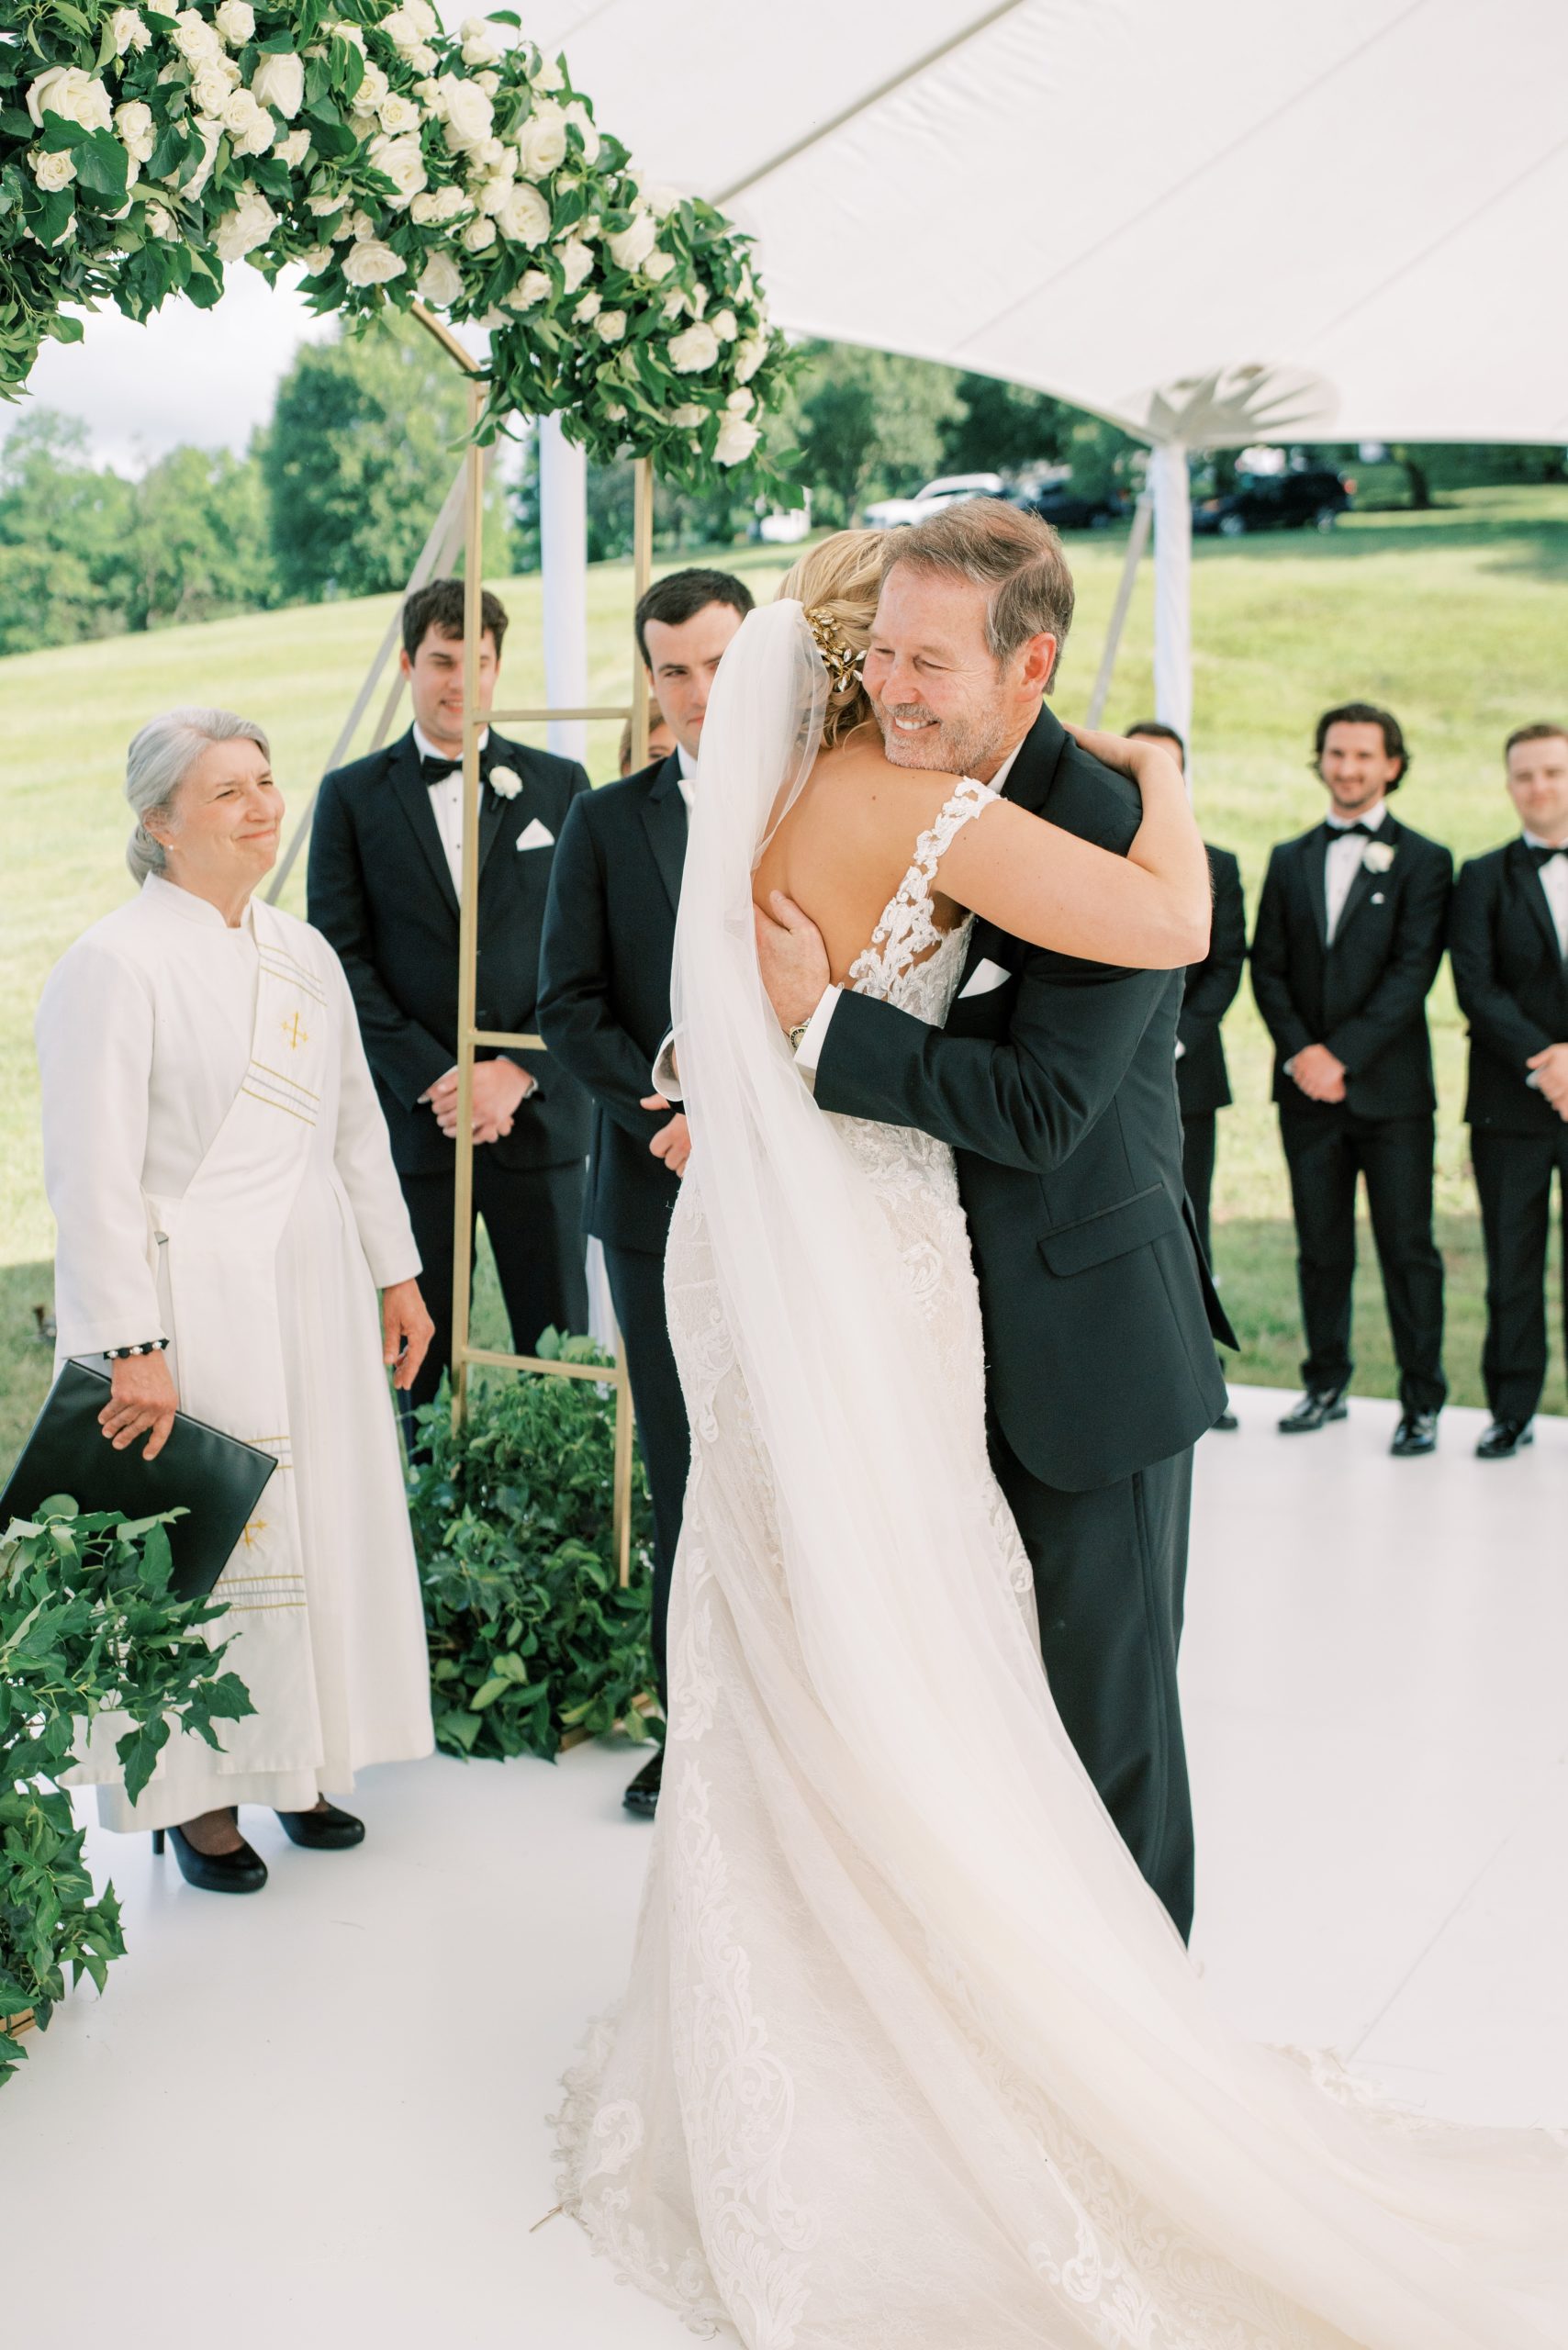 View this elegant, sailcloth-tented wedding at a private estate on the foothills of the Blue Ridge Mountains in Virginia.